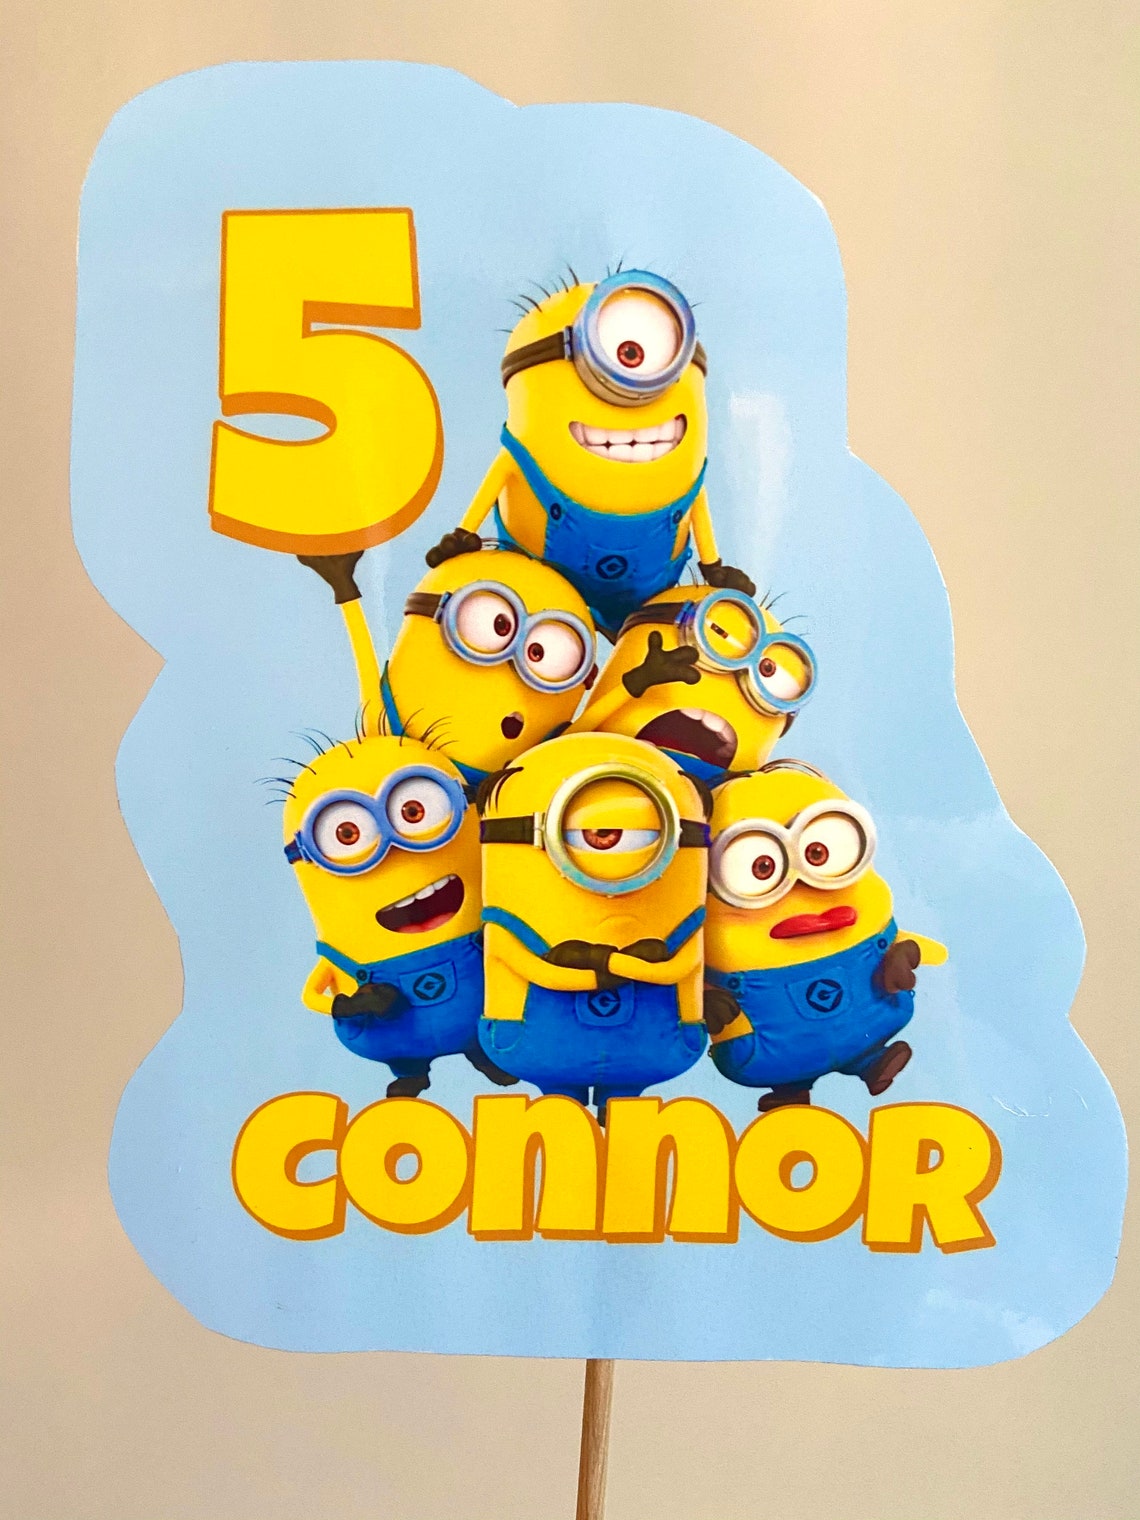 minions-free-printable-toppers-for-cakes-050-jpg-1-131-c4b